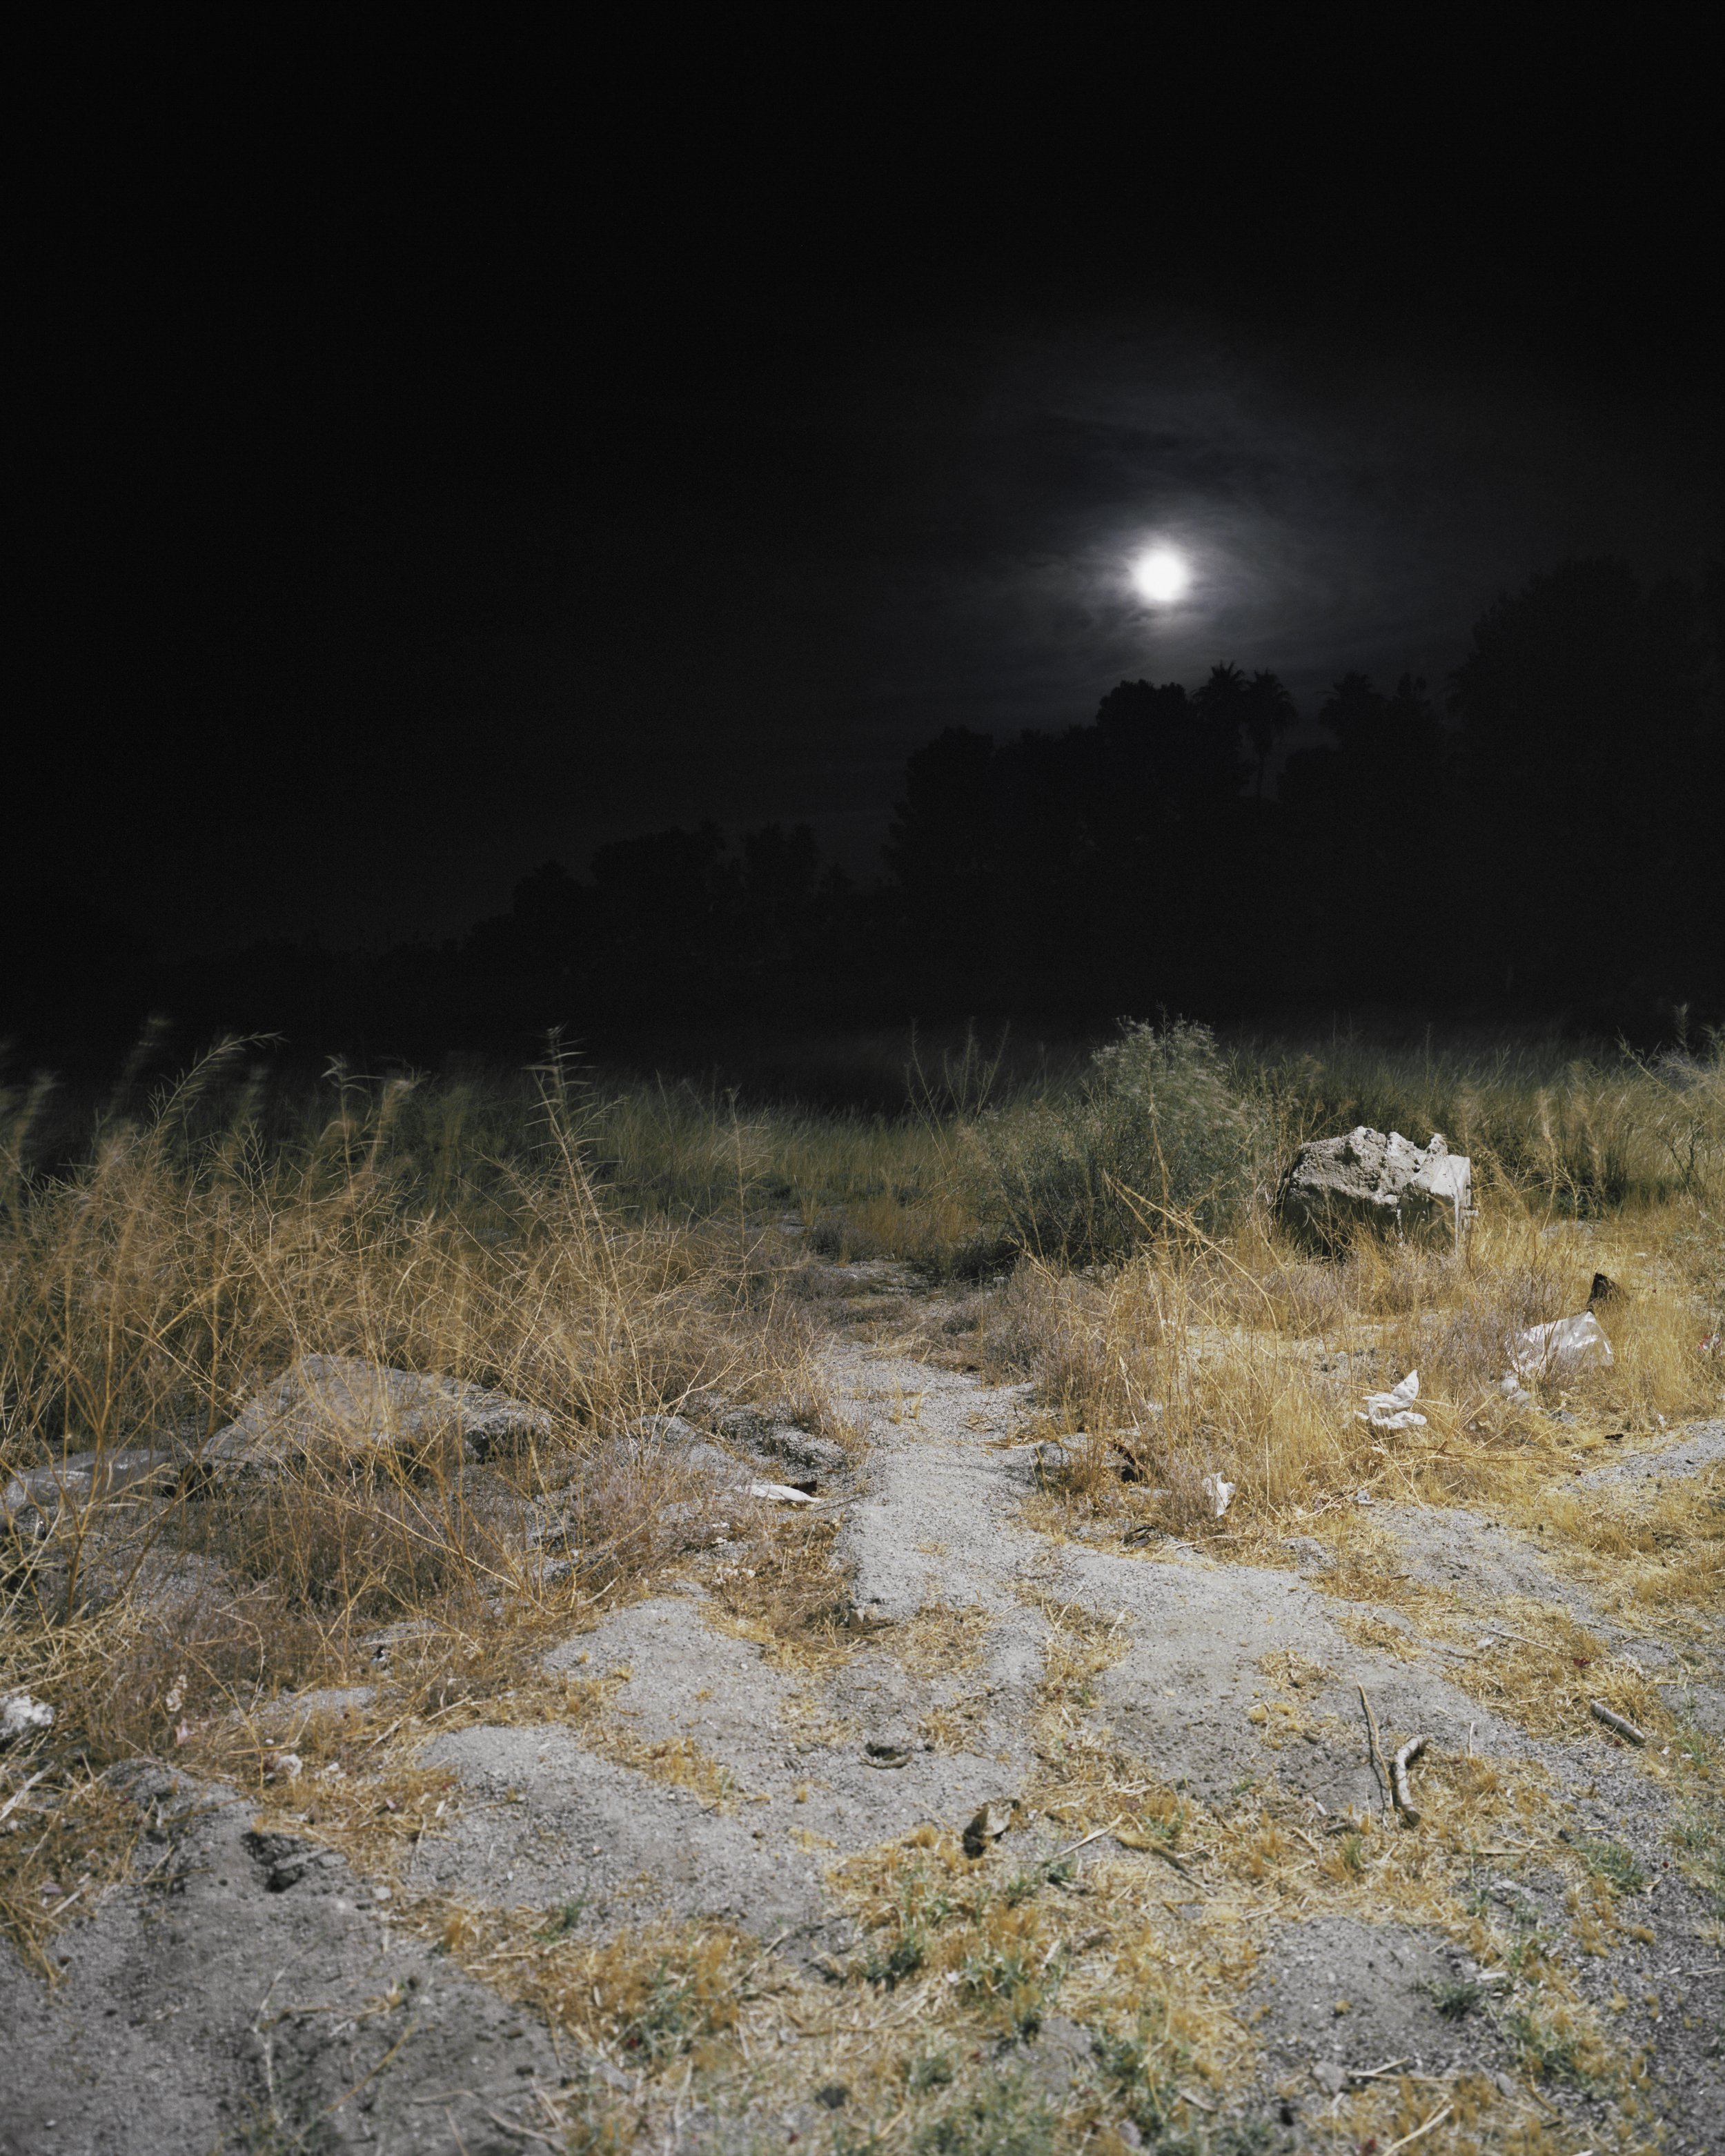  Lot with Moon, 2019 Archival pigment print   Writing    Film    Installation  